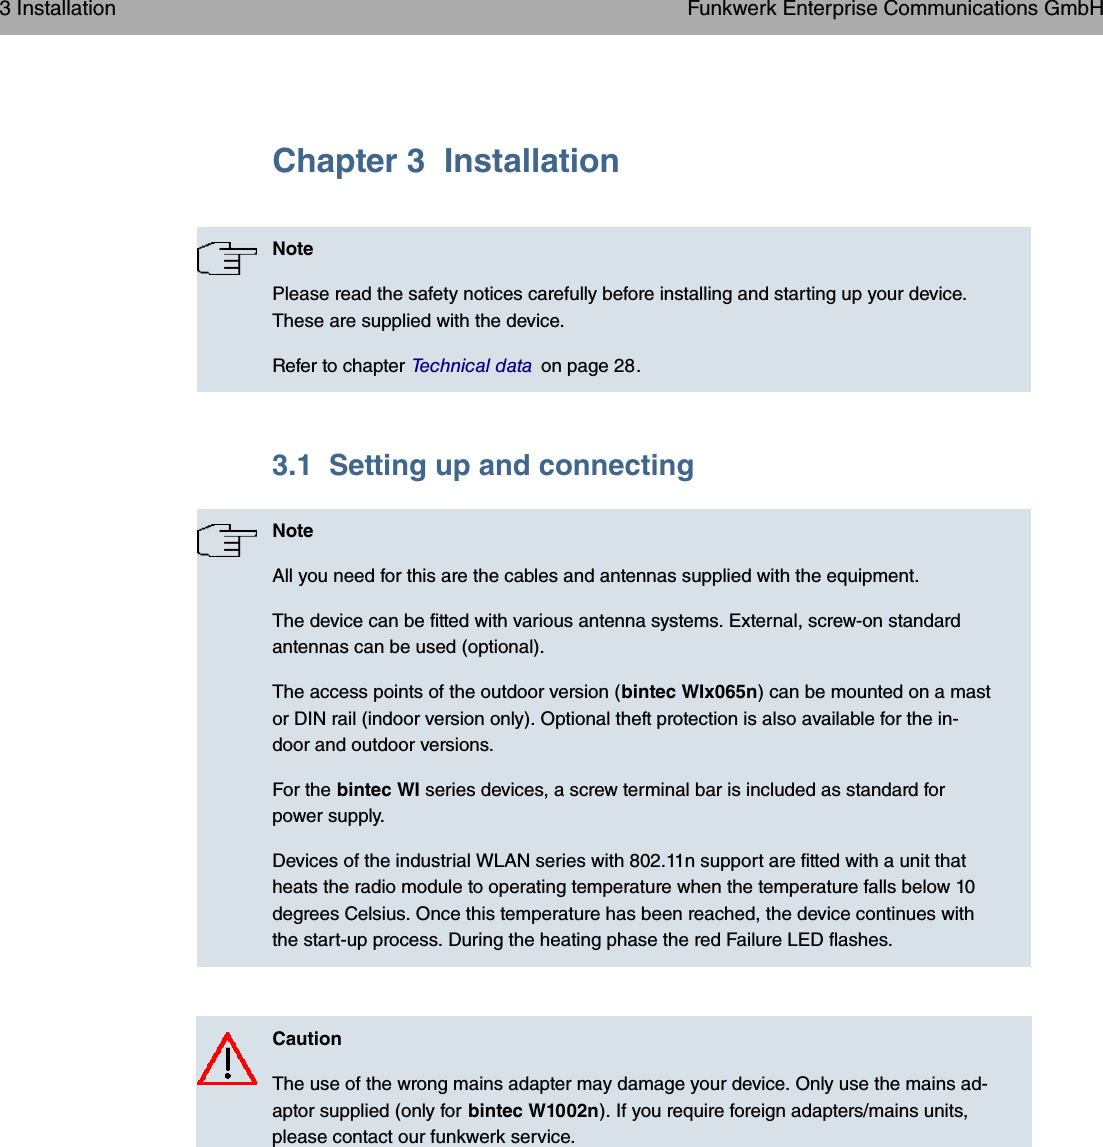 Chapter 3 InstallationNotePlease read the safety notices carefully before installing and starting up your device.These are supplied with the device.Refer to chapter Technical data on page 28.3.1 Setting up and connectingNoteAll you need for this are the cables and antennas supplied with the equipment.The device can be fitted with various antenna systems. External, screw-on standardantennas can be used (optional).The access points of the outdoor version (bintec WIx065n) can be mounted on a mastor DIN rail (indoor version only). Optional theft protection is also available for the in-door and outdoor versions.For the bintec WI series devices, a screw terminal bar is included as standard forpower supply.Devices of the industrial WLAN series with 802.11n support are fitted with a unit thatheats the radio module to operating temperature when the temperature falls below 10degrees Celsius. Once this temperature has been reached, the device continues withthe start-up process. During the heating phase the red Failure LED flashes.CautionThe use of the wrong mains adapter may damage your device. Only use the mains ad-aptor supplied (only for bintec W1002n). If you require foreign adapters/mains units,please contact our funkwerk service.3 Installation Funkwerk Enterprise Communications GmbH6 bintec WLAN and Industrial WLAN